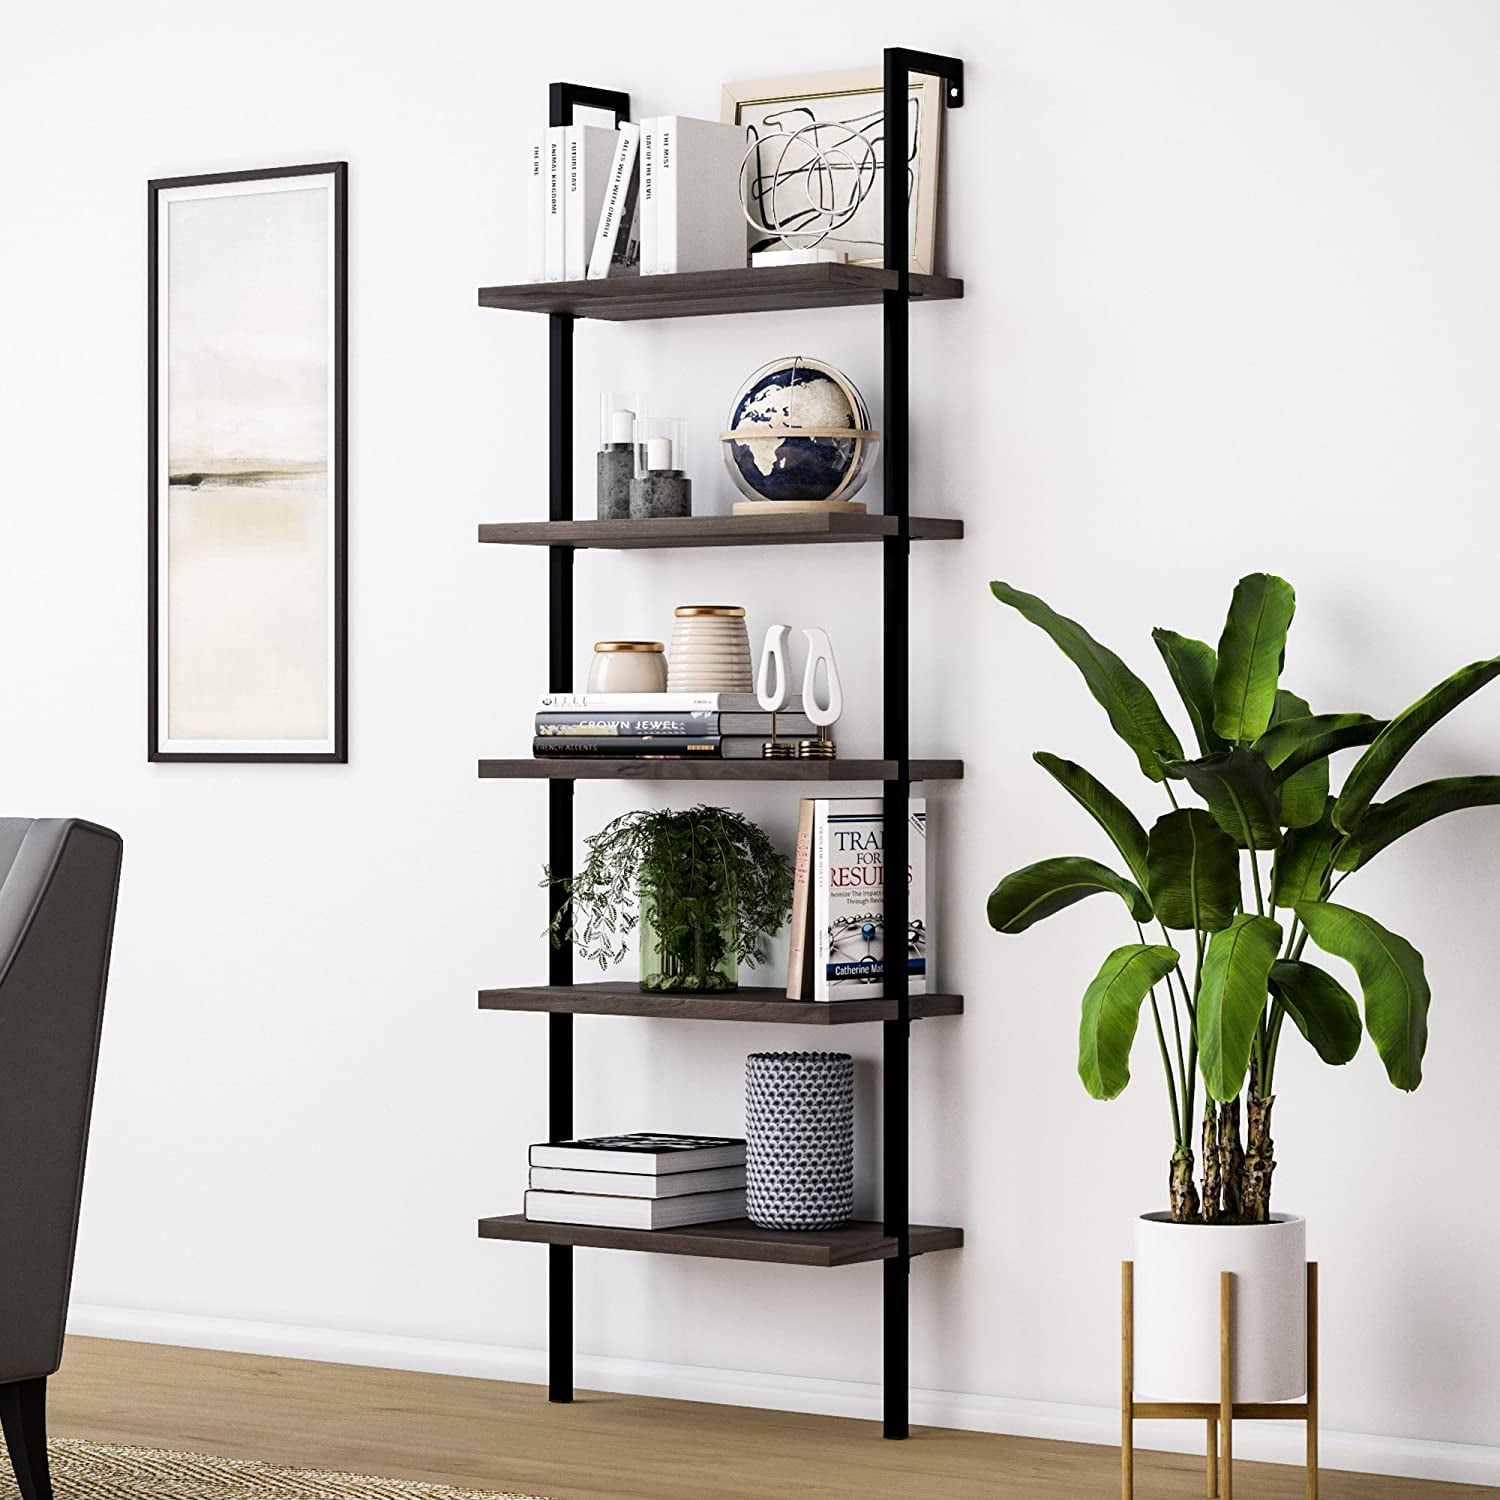 72.5 inches Modern Wood Bookshelf with industrial Stable Metal Frame Black Bizzoelife 5-Shelf Bookcase Storage Organizer: Open Wall-Mounted Ladder Shelves Stand Rack Bookshelf for Home Office Decor 